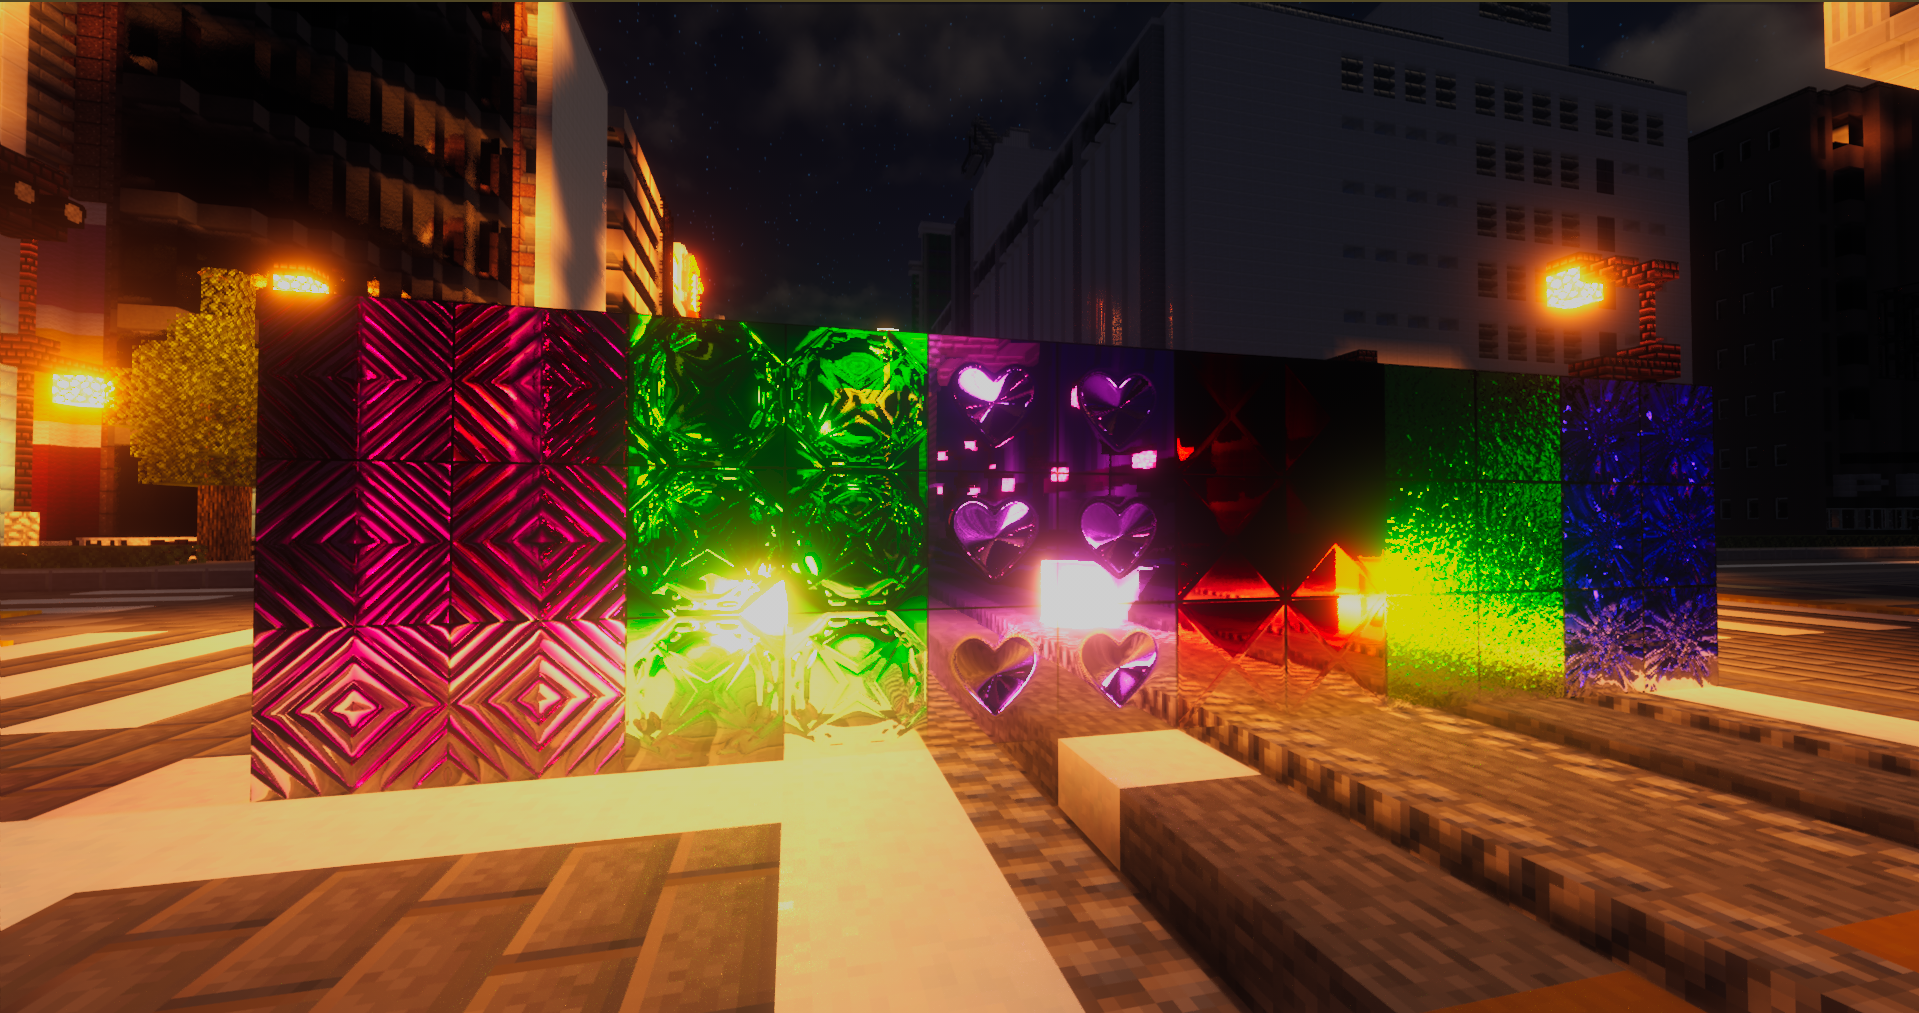 images/2406/14/Noble_Shaders_4.png